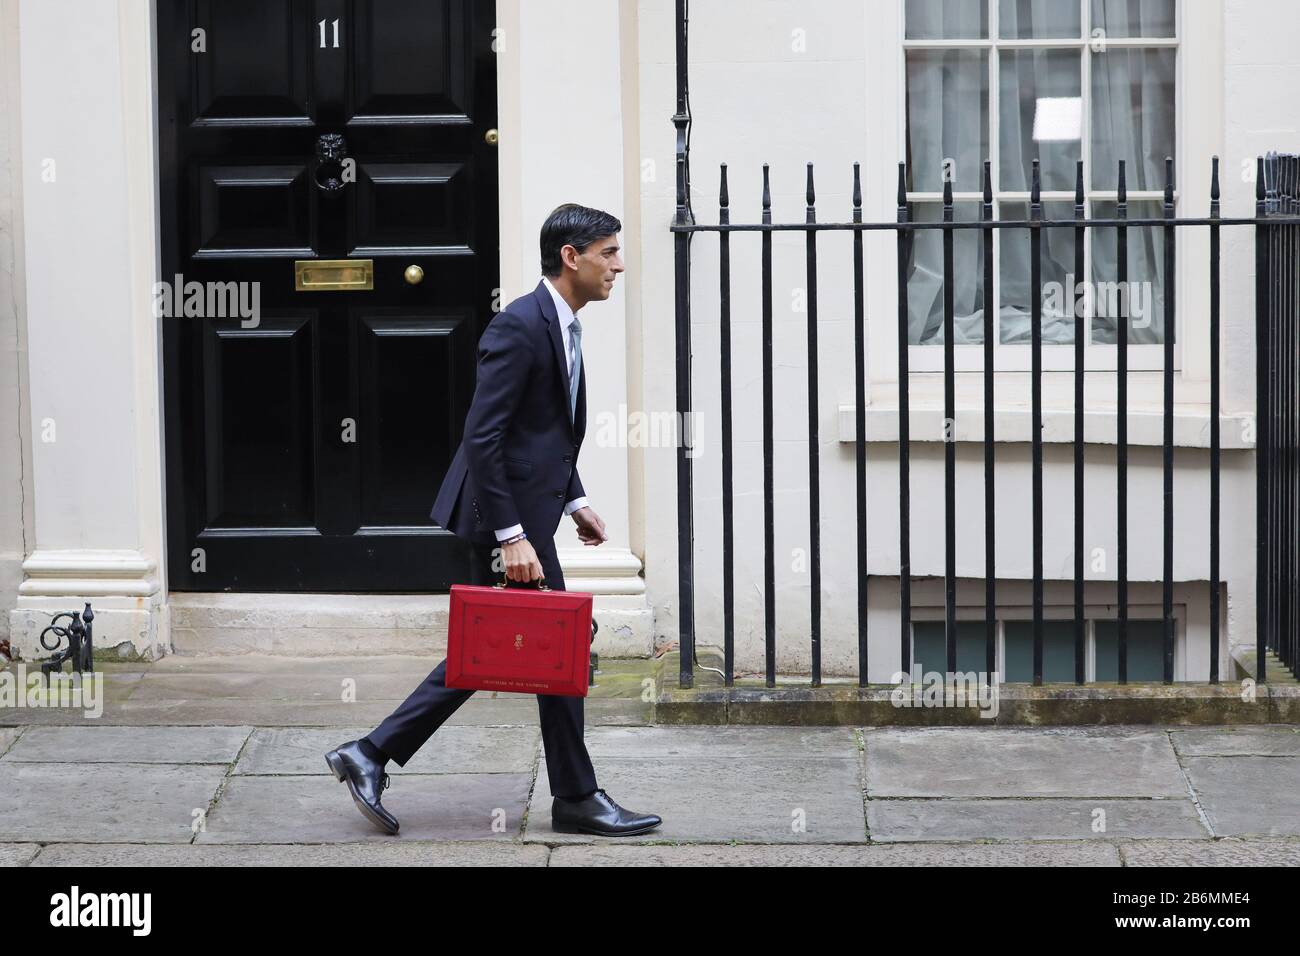 London, London, UK. 11th Mar, 2020. Rishi Sunak, Britain's Chancellor of the Exchequer, leaves 11 Downing Street to deliver his budget to Parliament, in London, Britain on March 11, 2020. Credit: Tim Ireland/Xinhua/Alamy Live News Stock Photo